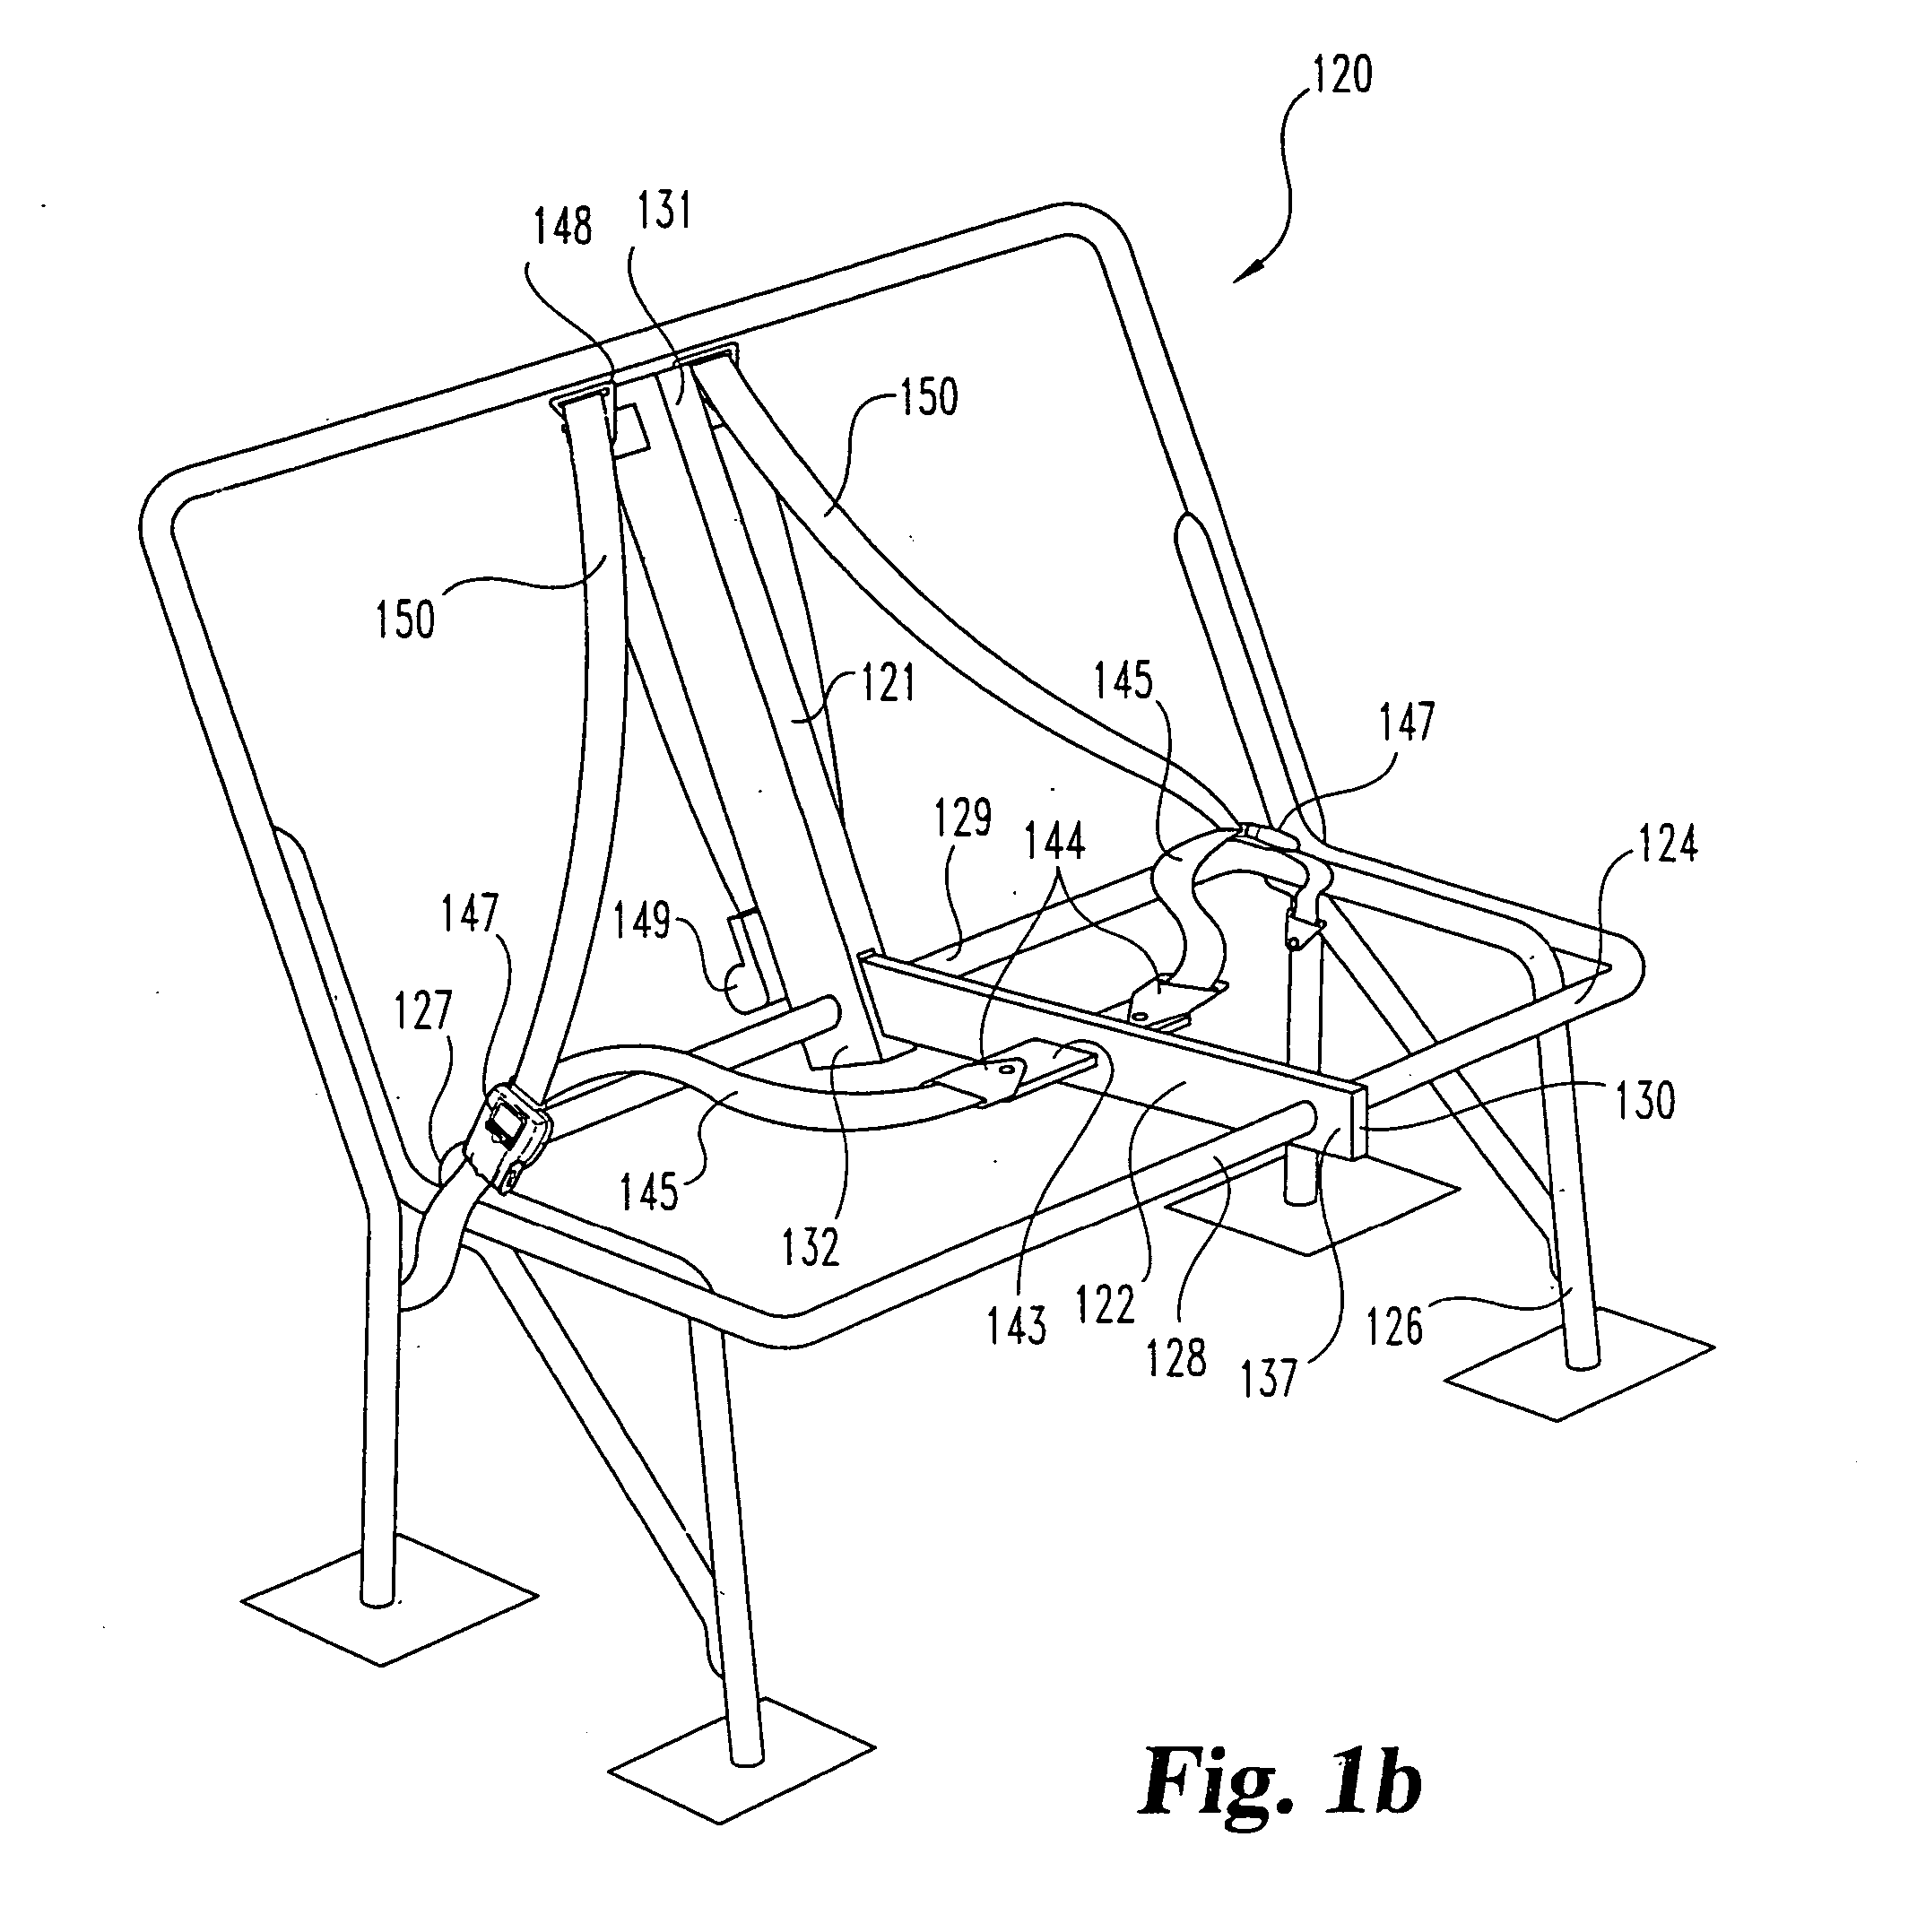 Child restraint system for a vehicle seat